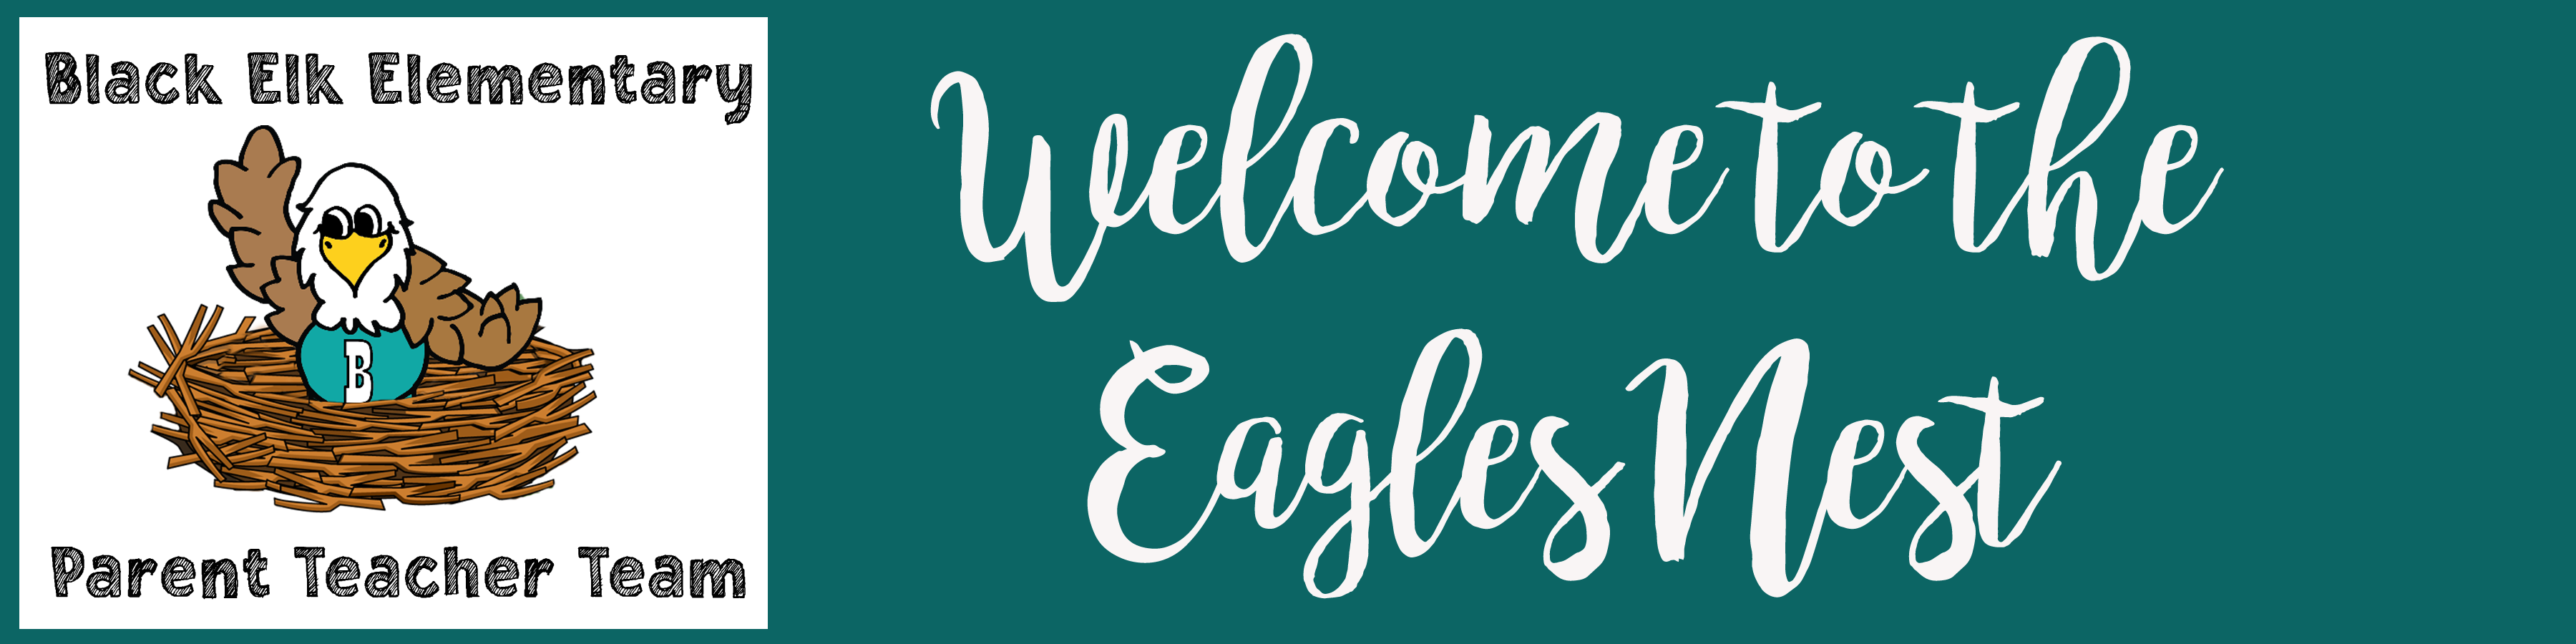 Welcome to the nest - eagle mascot in 